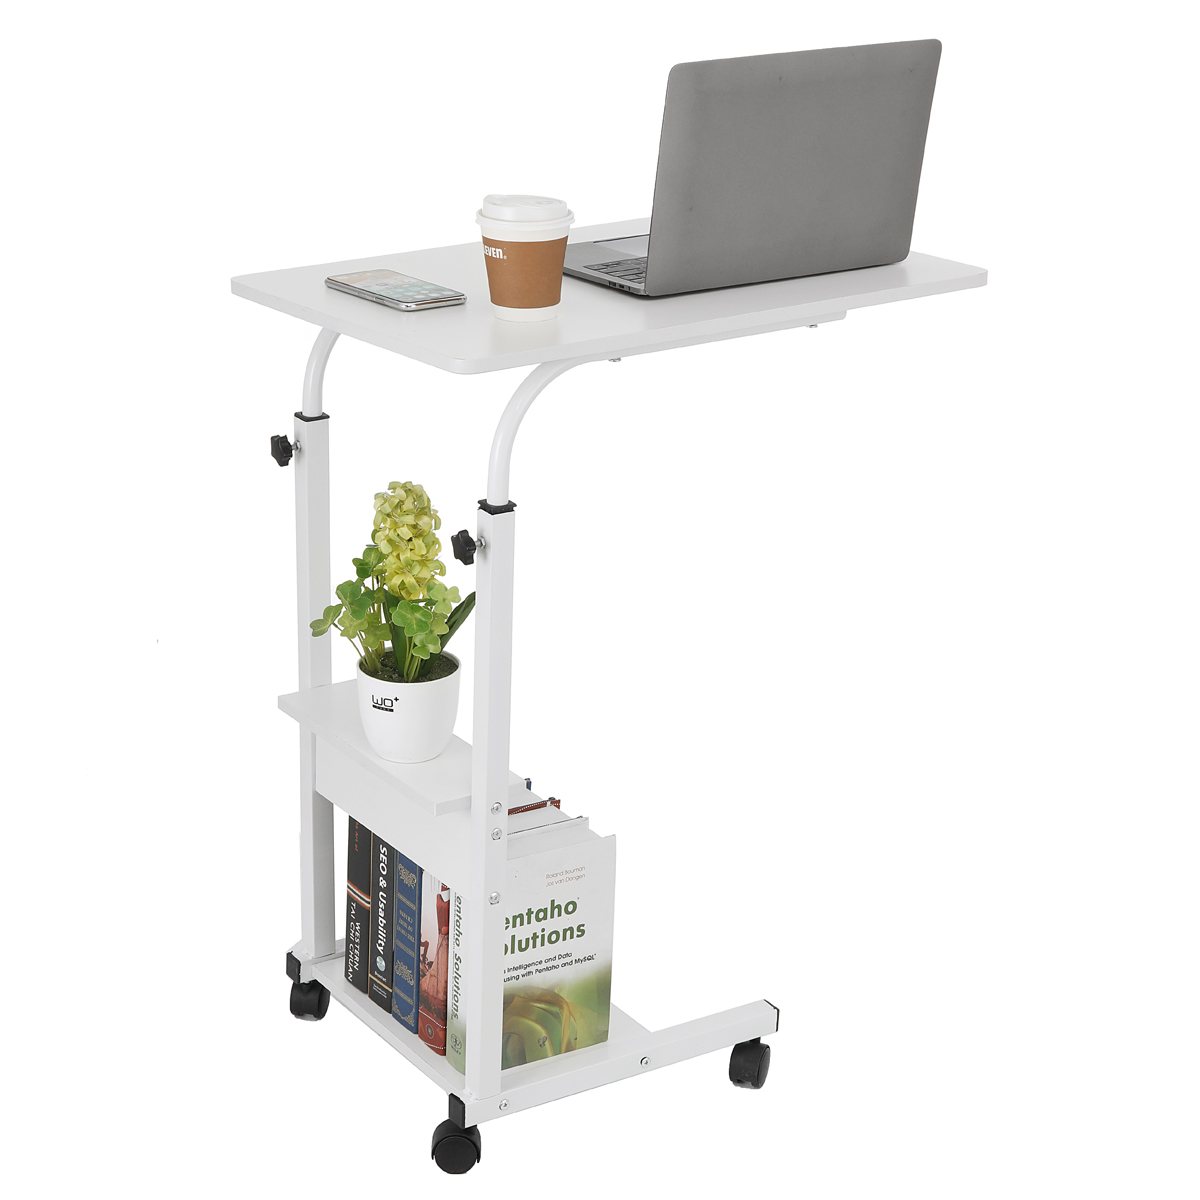 Movable-Laptop-Desk-Adjustable-Height-Computer-Notebook-Desk-Writing-Study-Table-Bedside-Tray-with-2-1750182-11